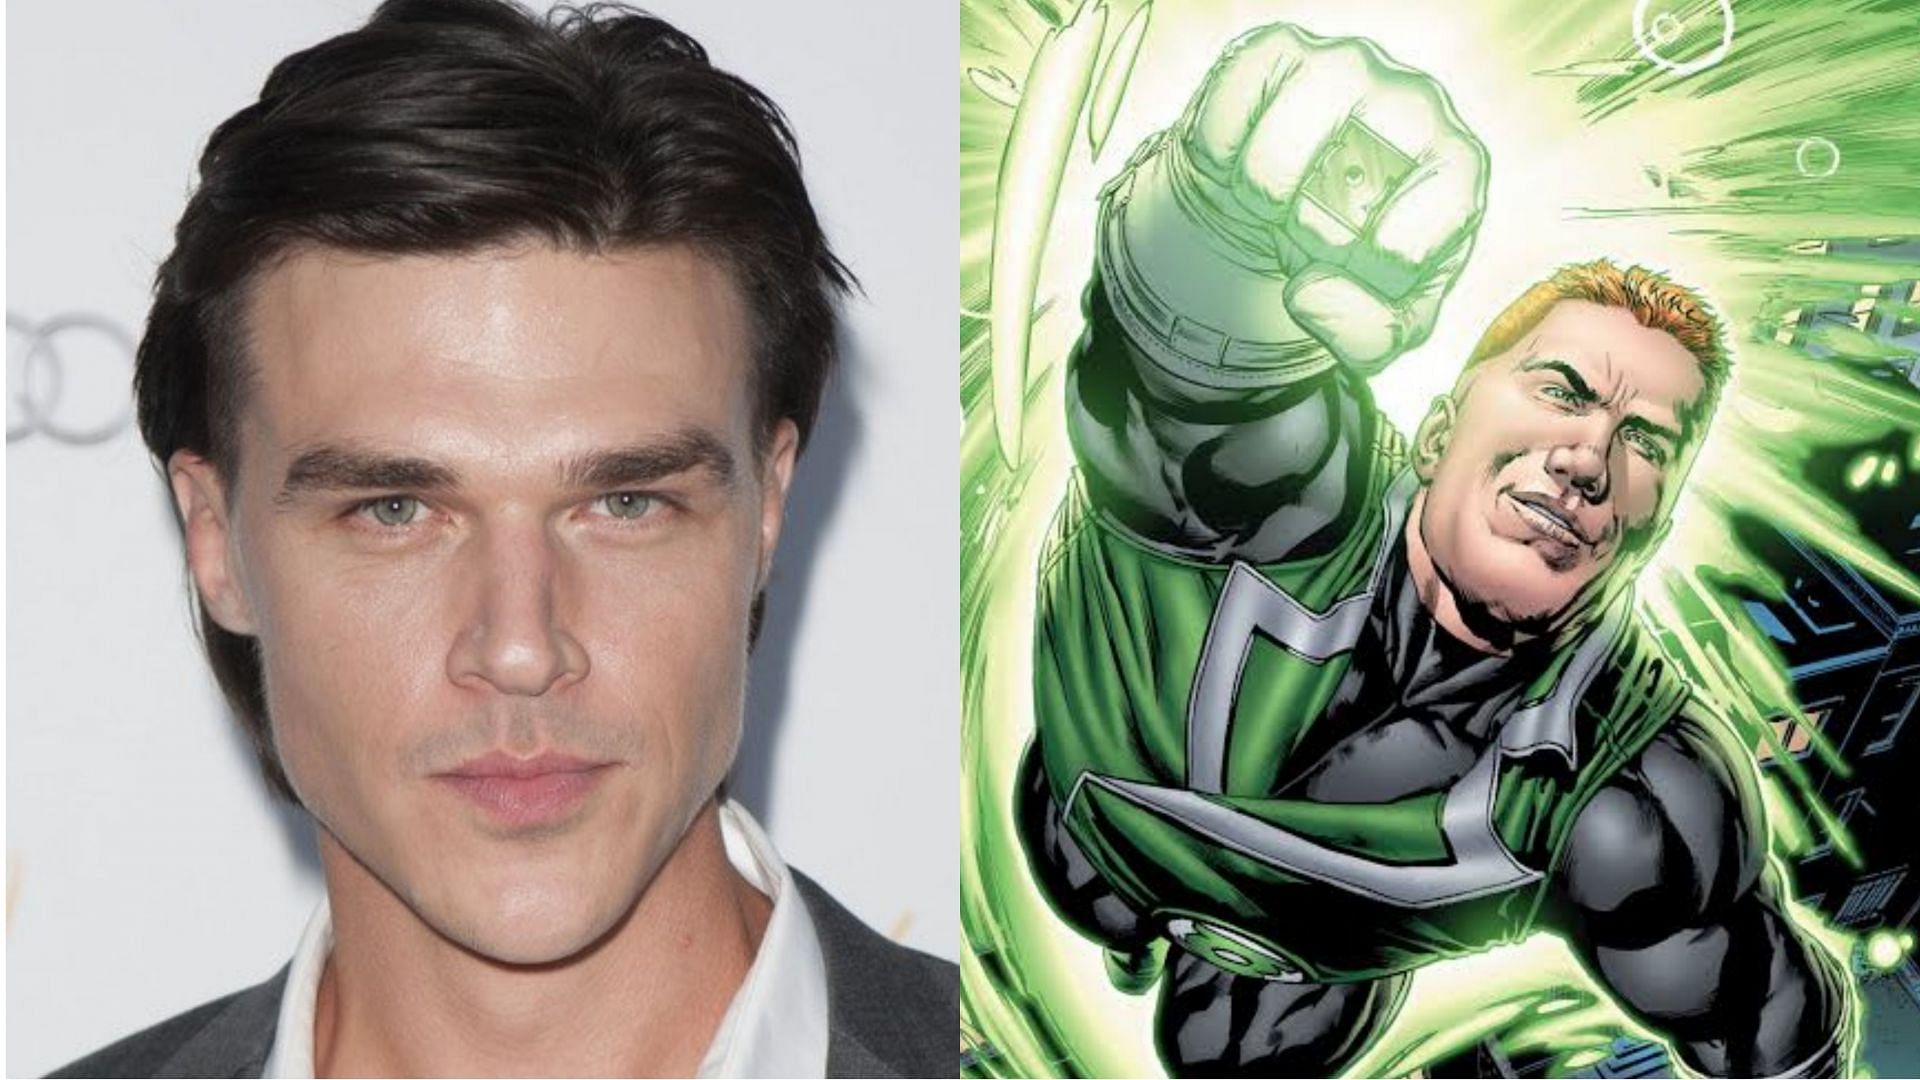 Finn Wittrock and Guy Gardner (Images via Wittrock_Inc/Twitter and DC Comics)